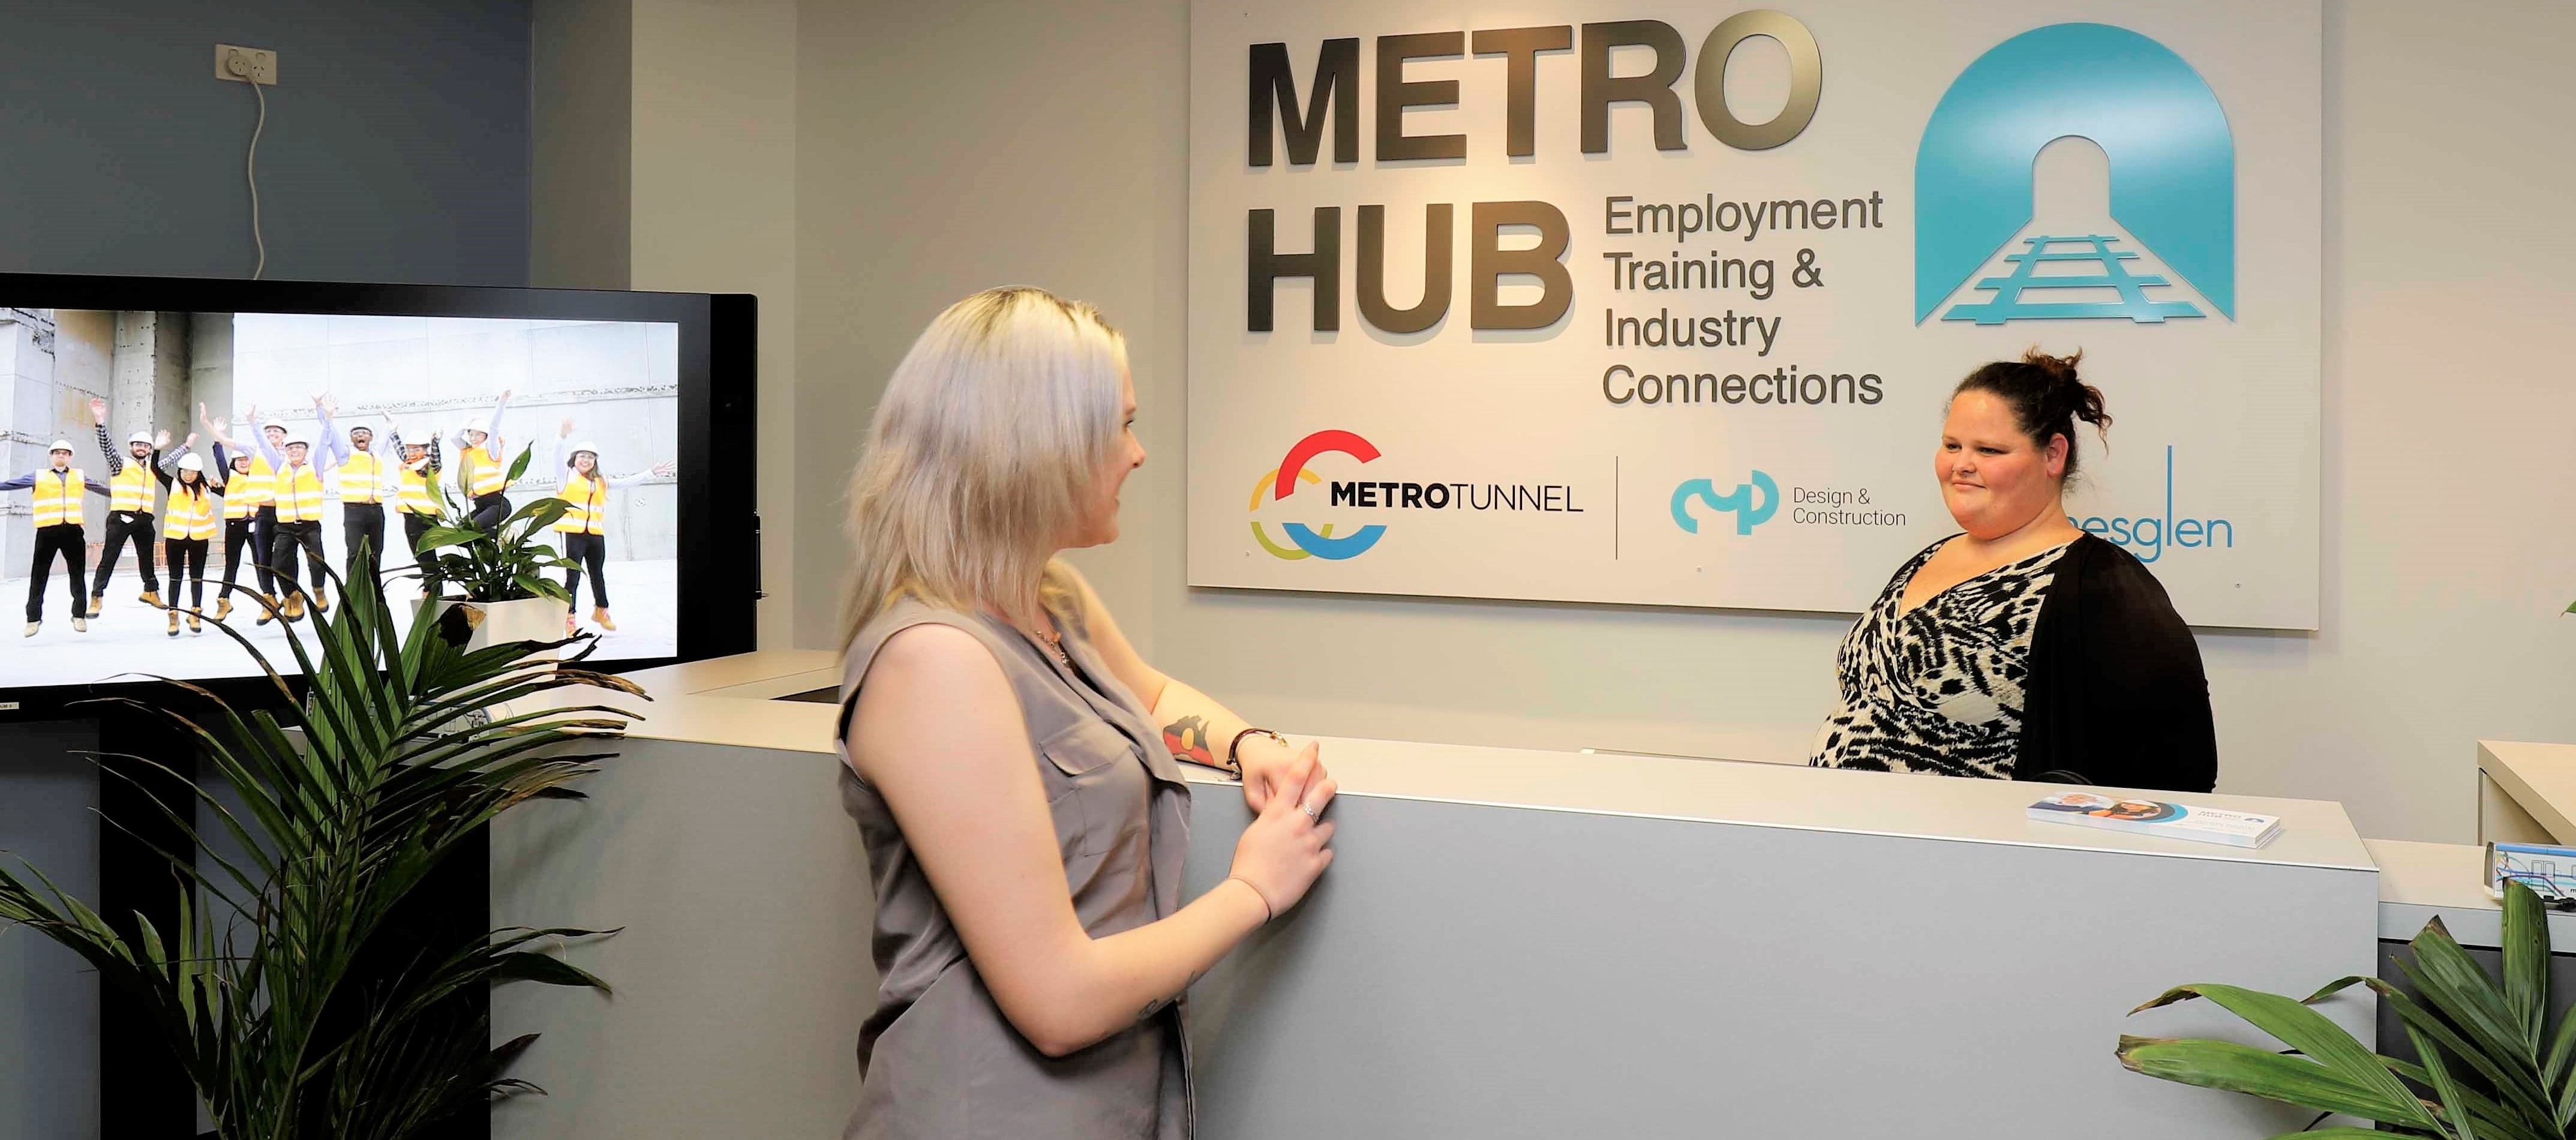 A woman speaks to another woman behind a counter with sign on the wall behind that says 'Metro Hub: Employment Training & Industry Connections